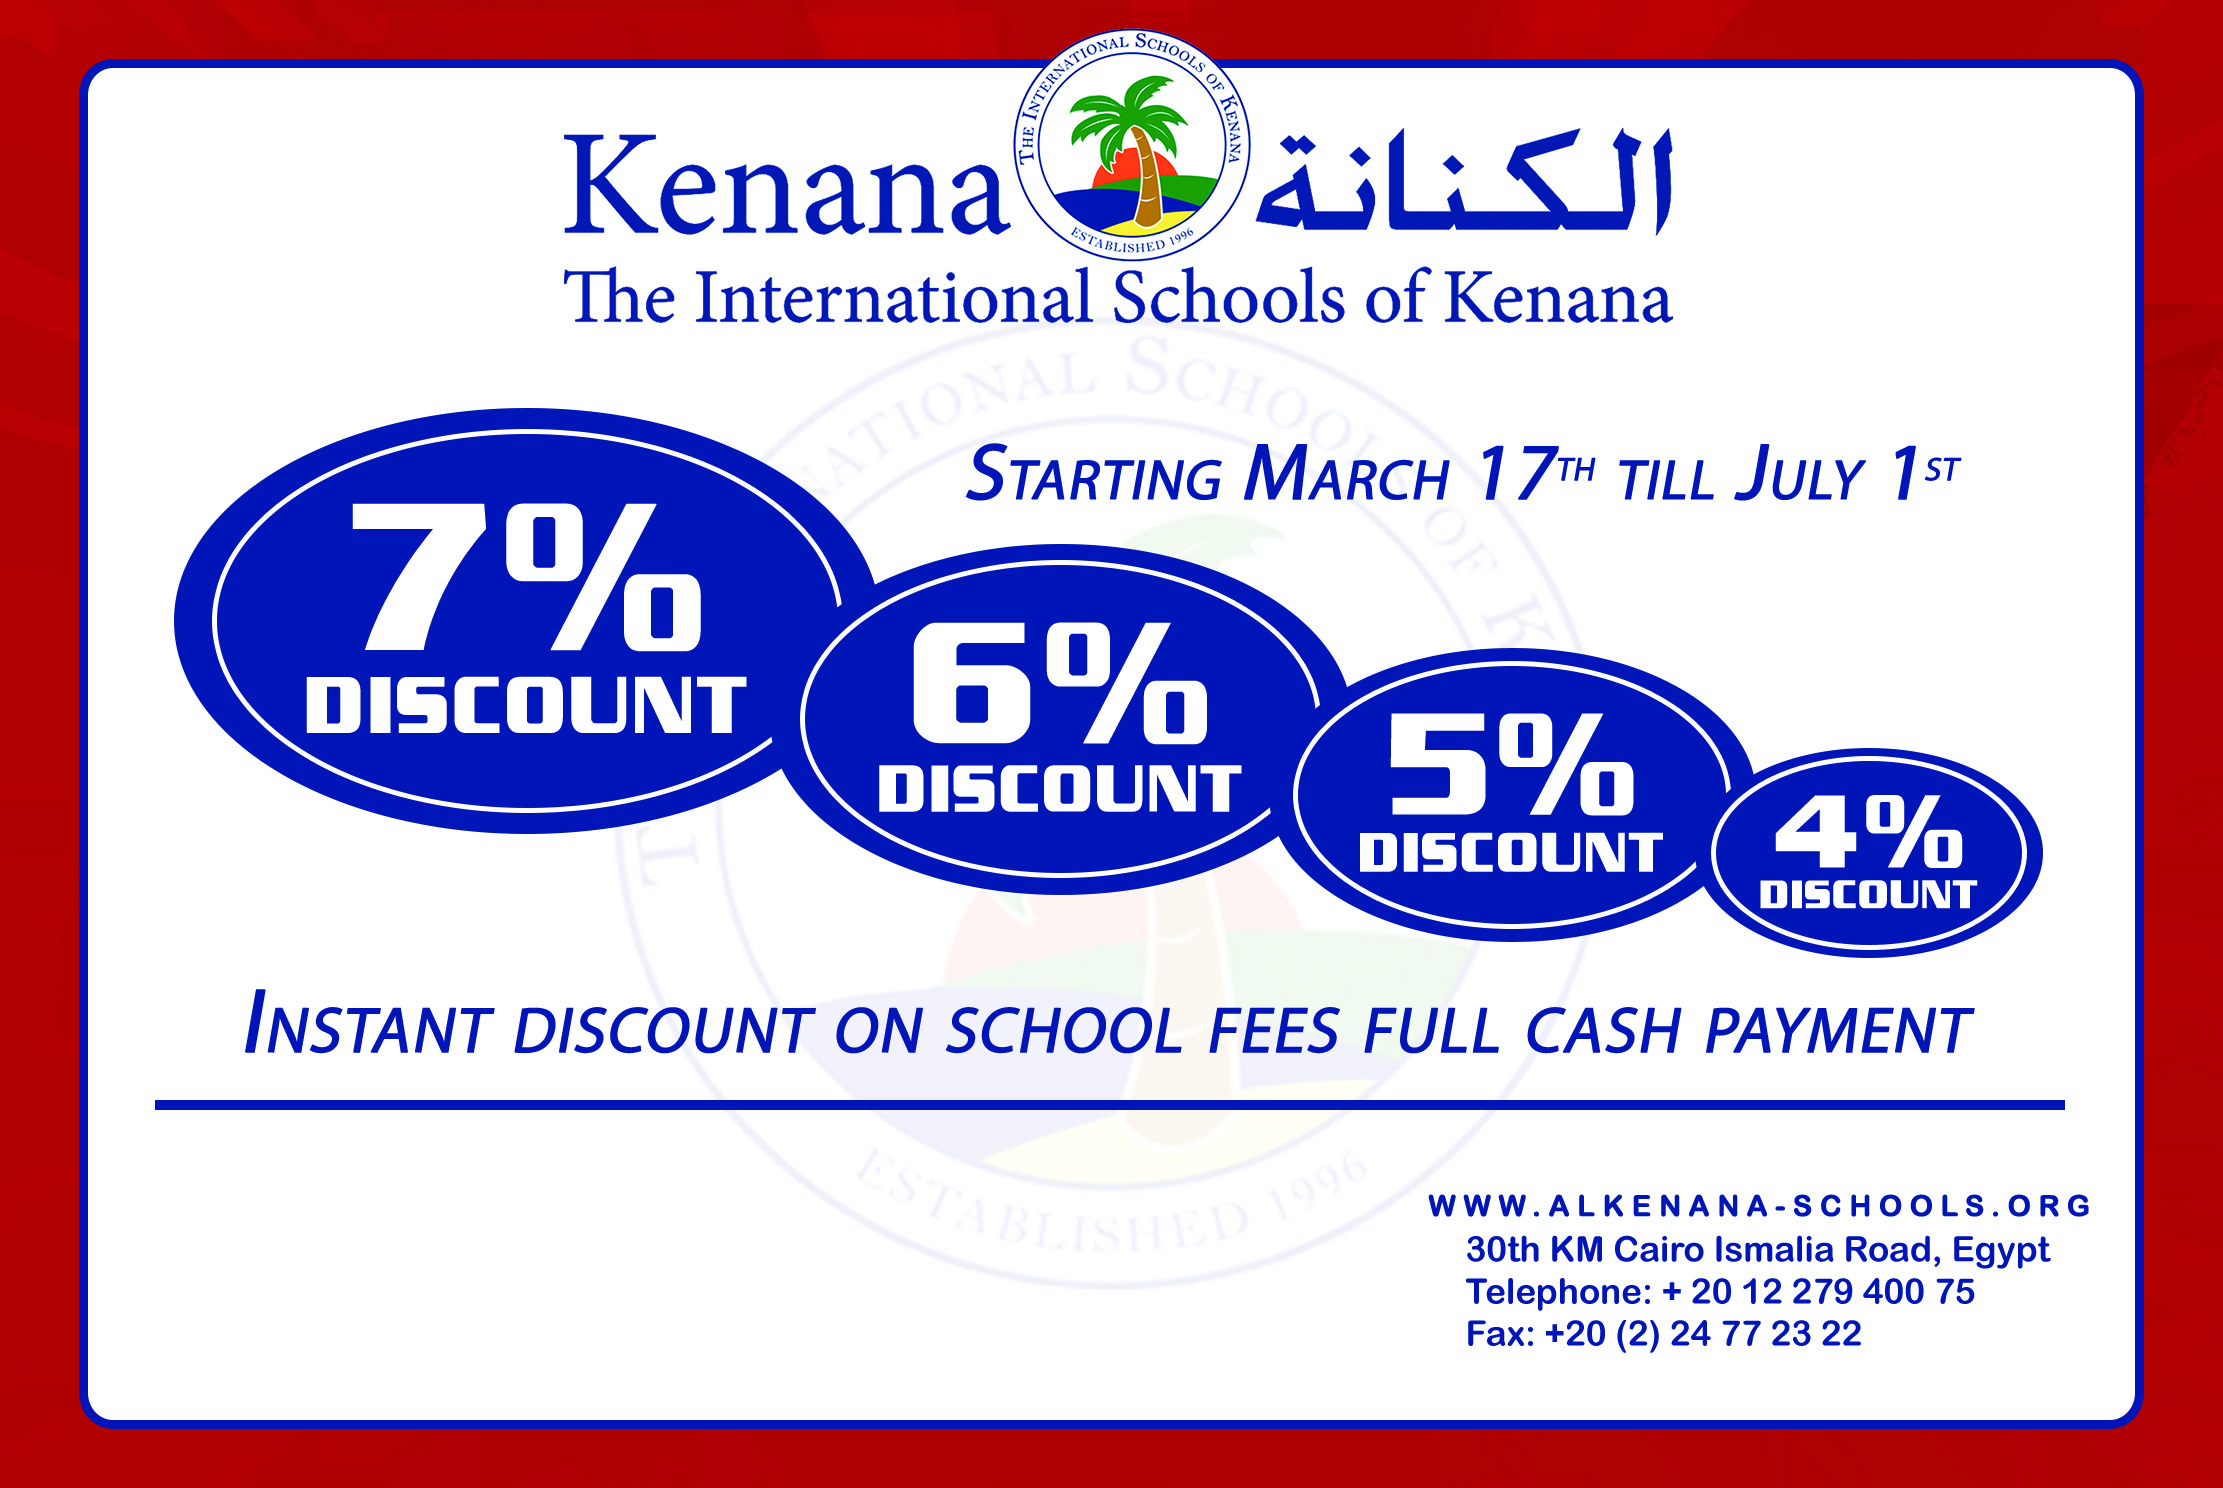 I.S.K. Instant discount on school fees full cash payment